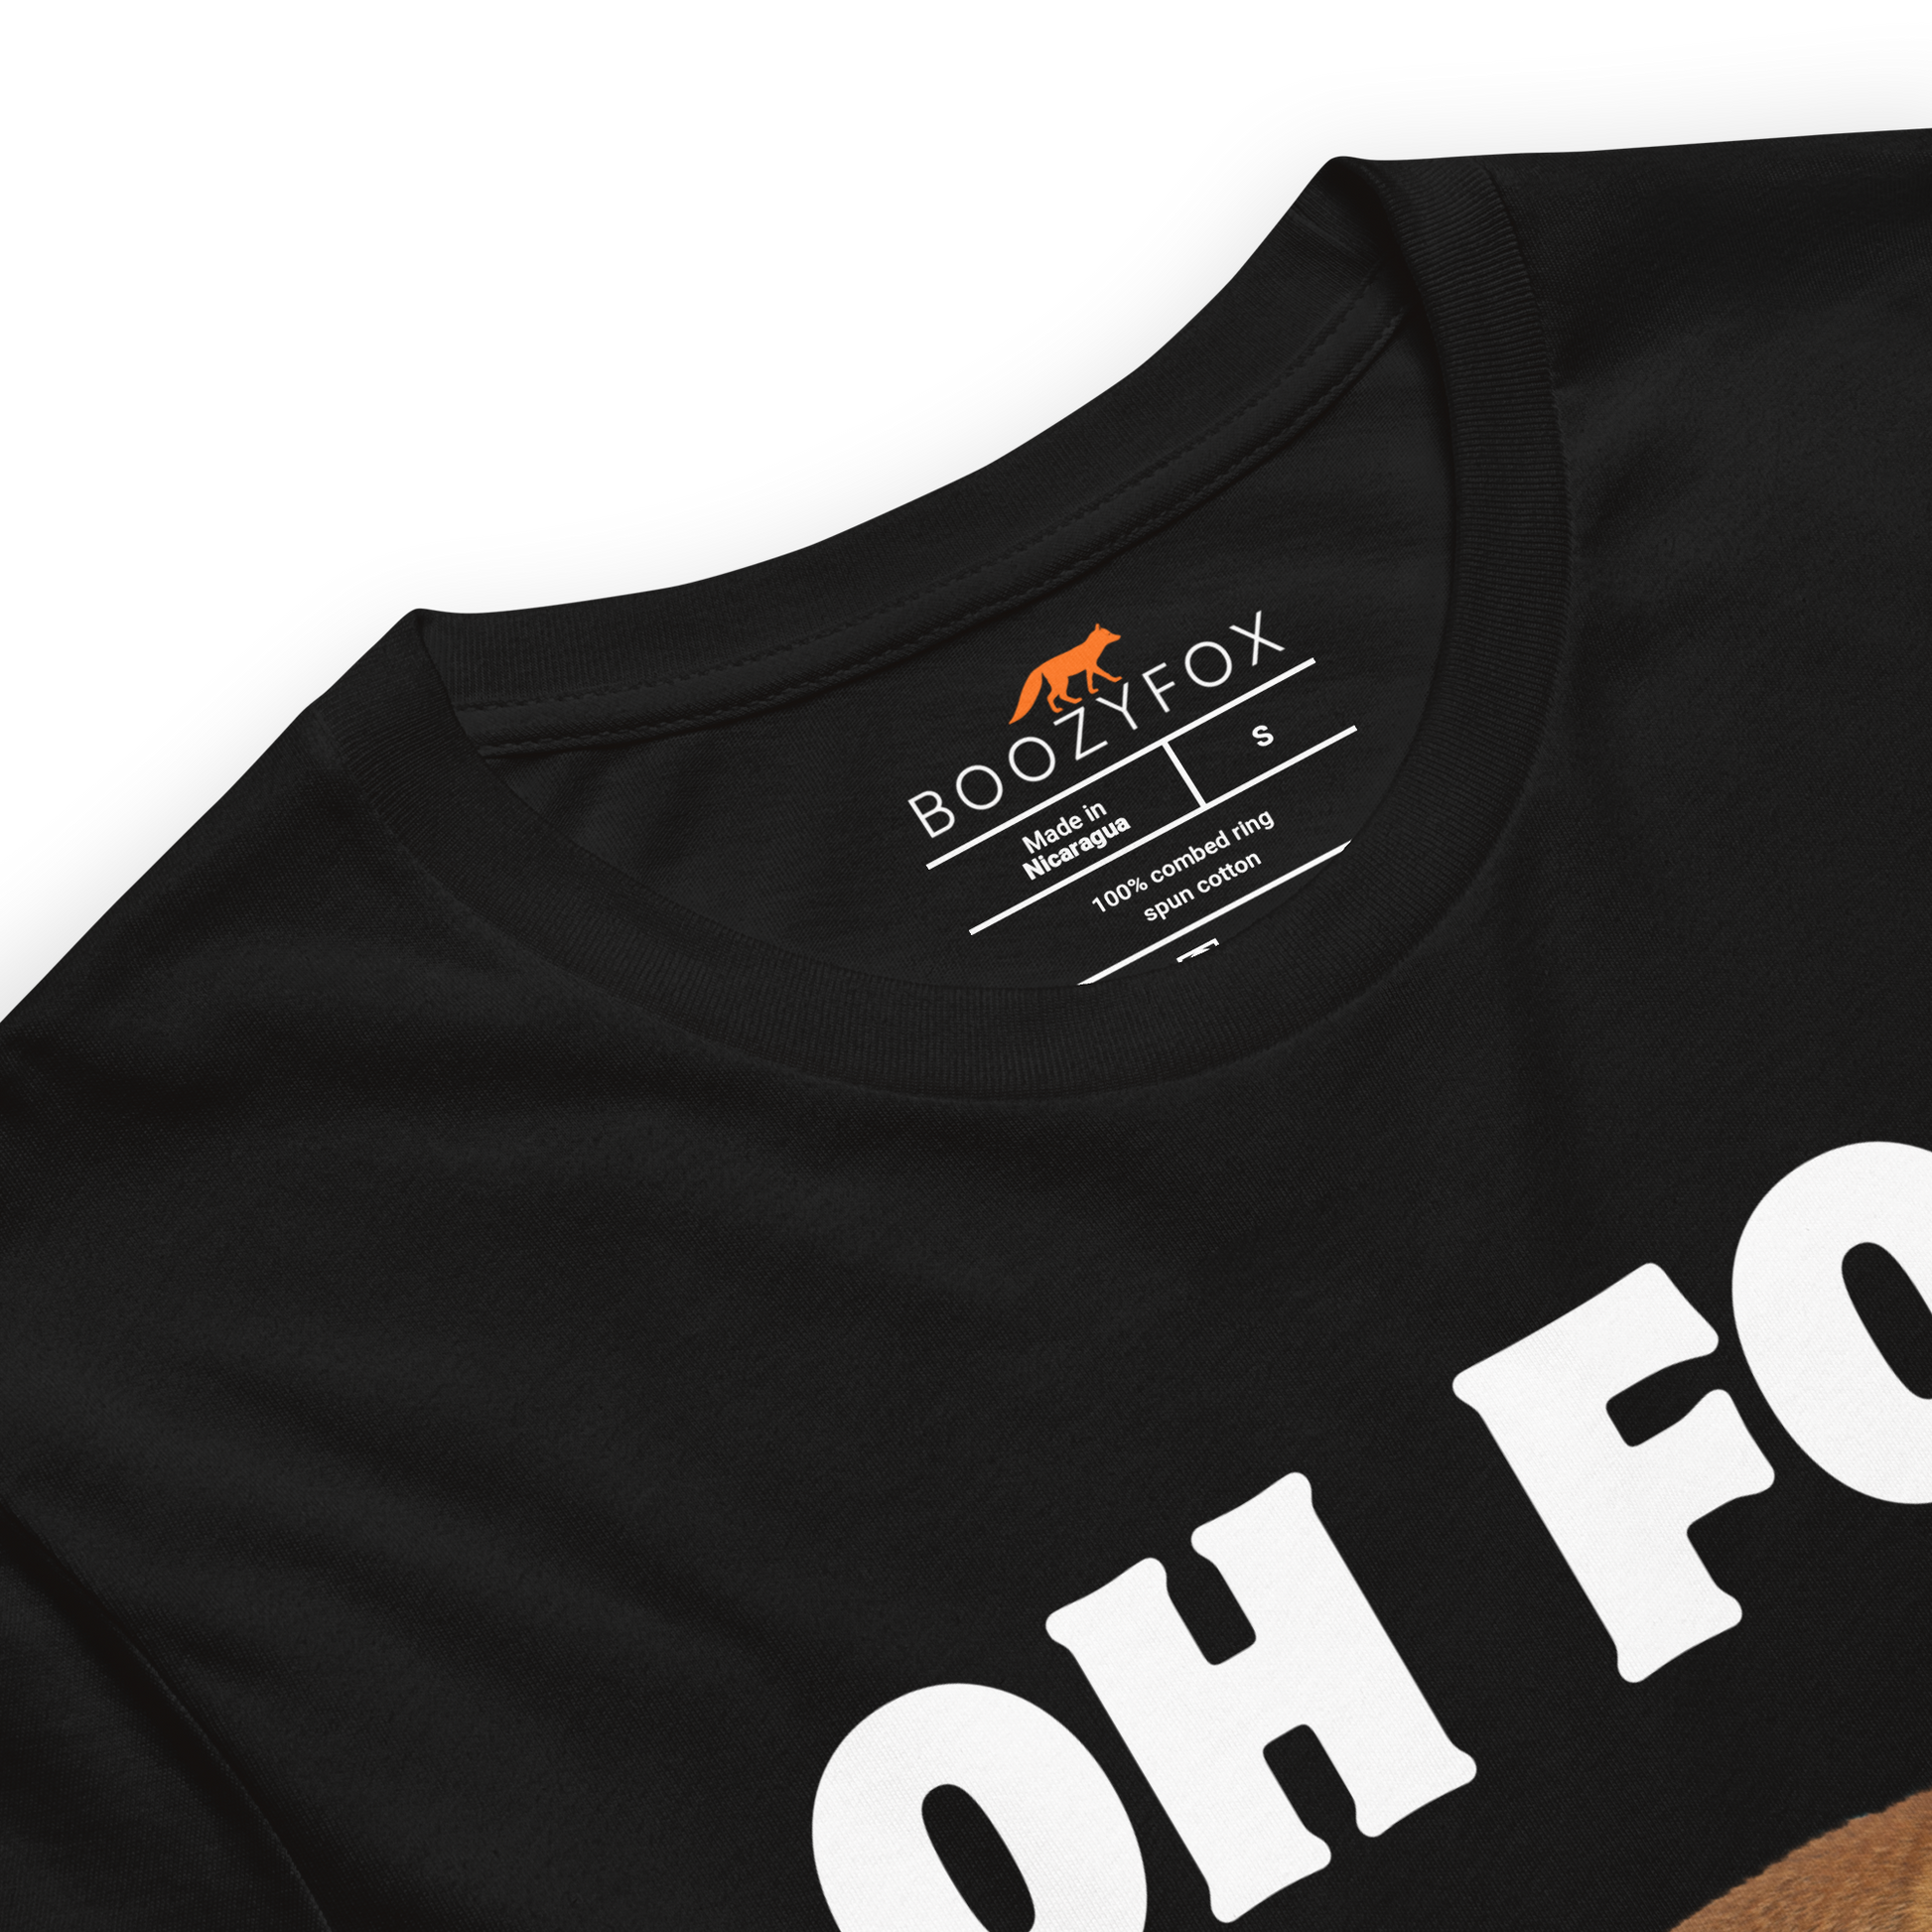 Product details of a Black Premium Fox T-Shirt featuring a Oh For Fox Sake graphic on the chest - Funny Graphic Fox Tees - Boozy Fox